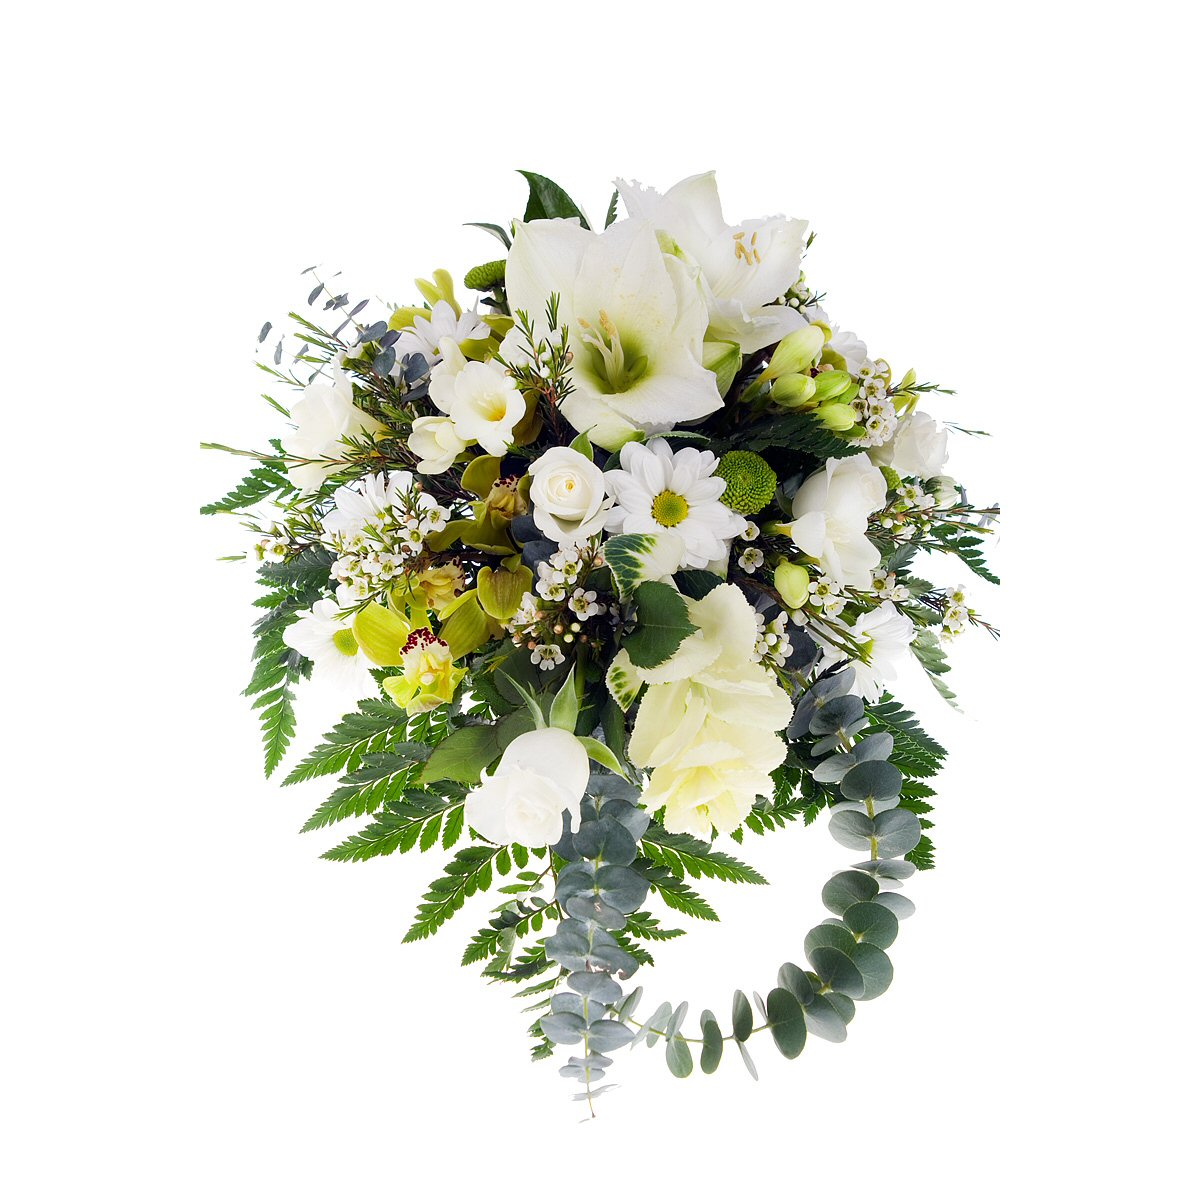 Home   Business Flowers   White   Cream Bouquet